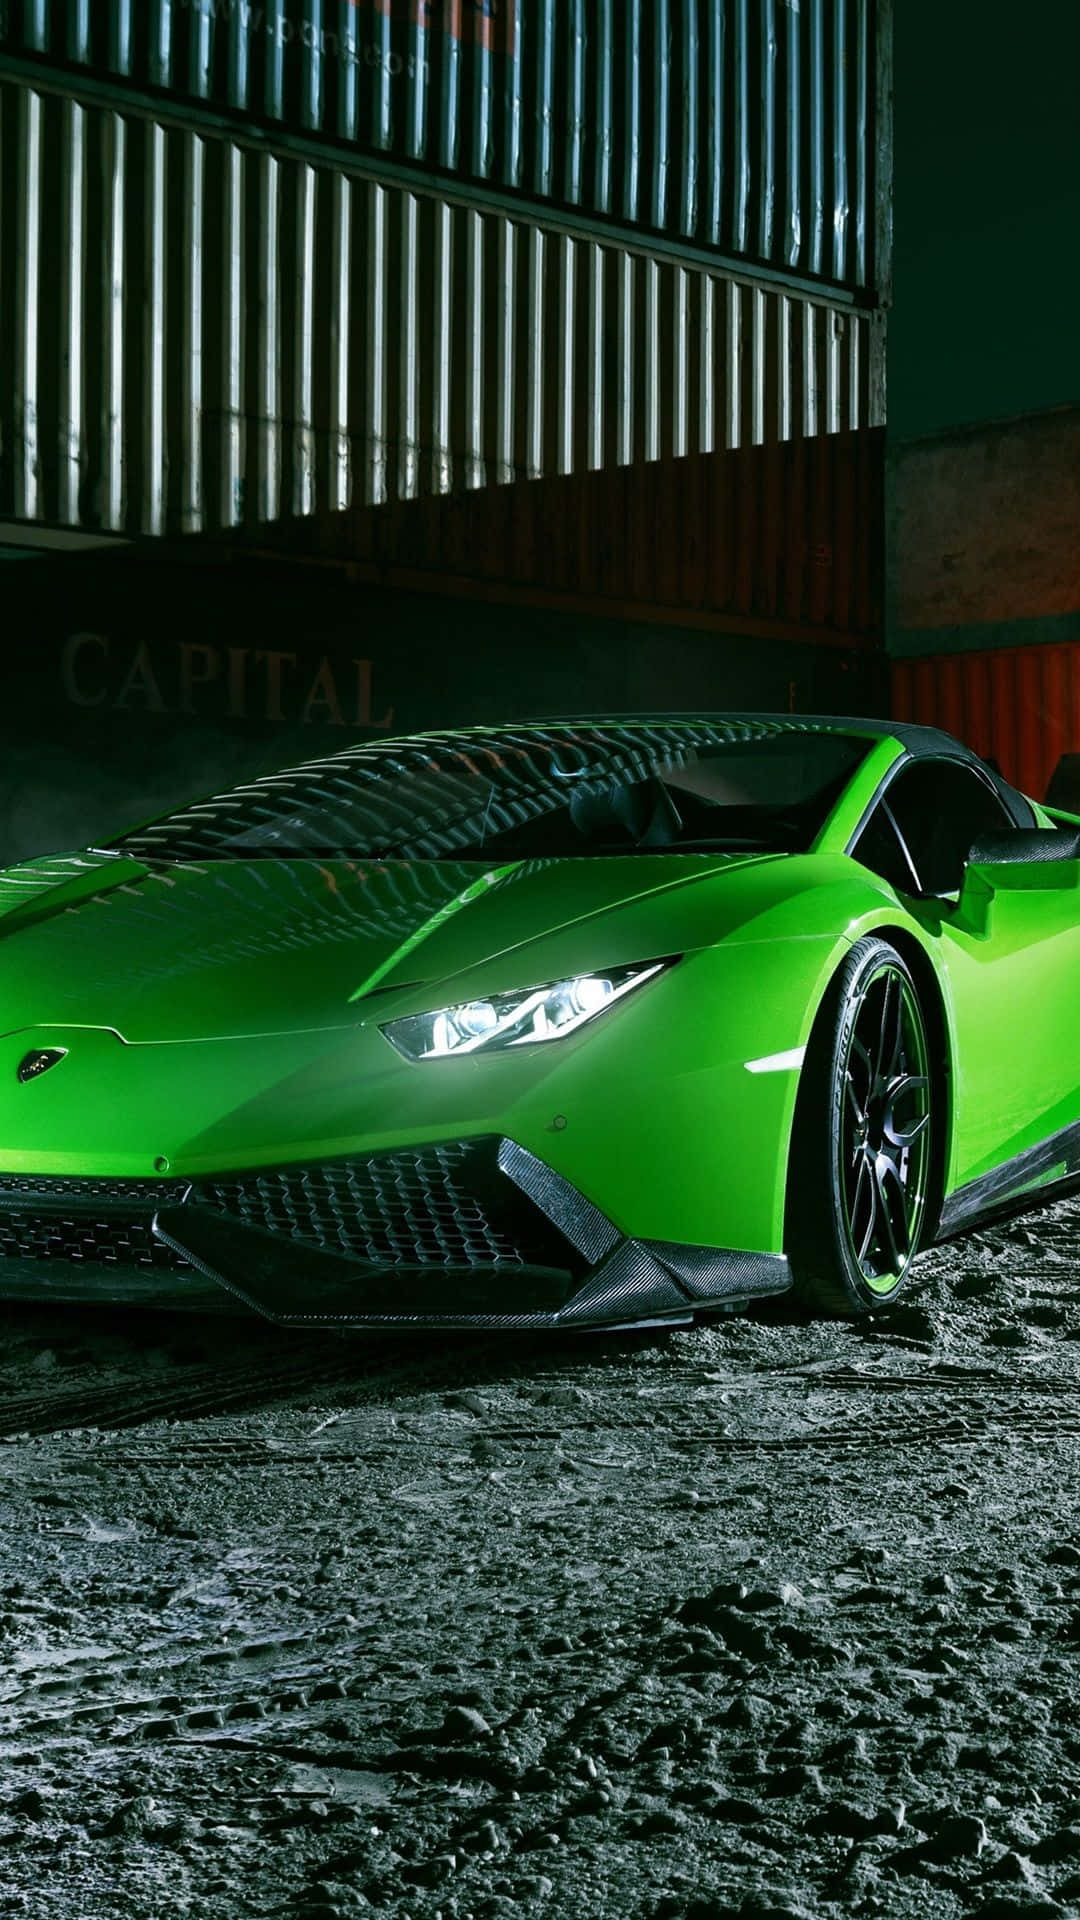 Experience the class and speed of a green Lamborghini Wallpaper